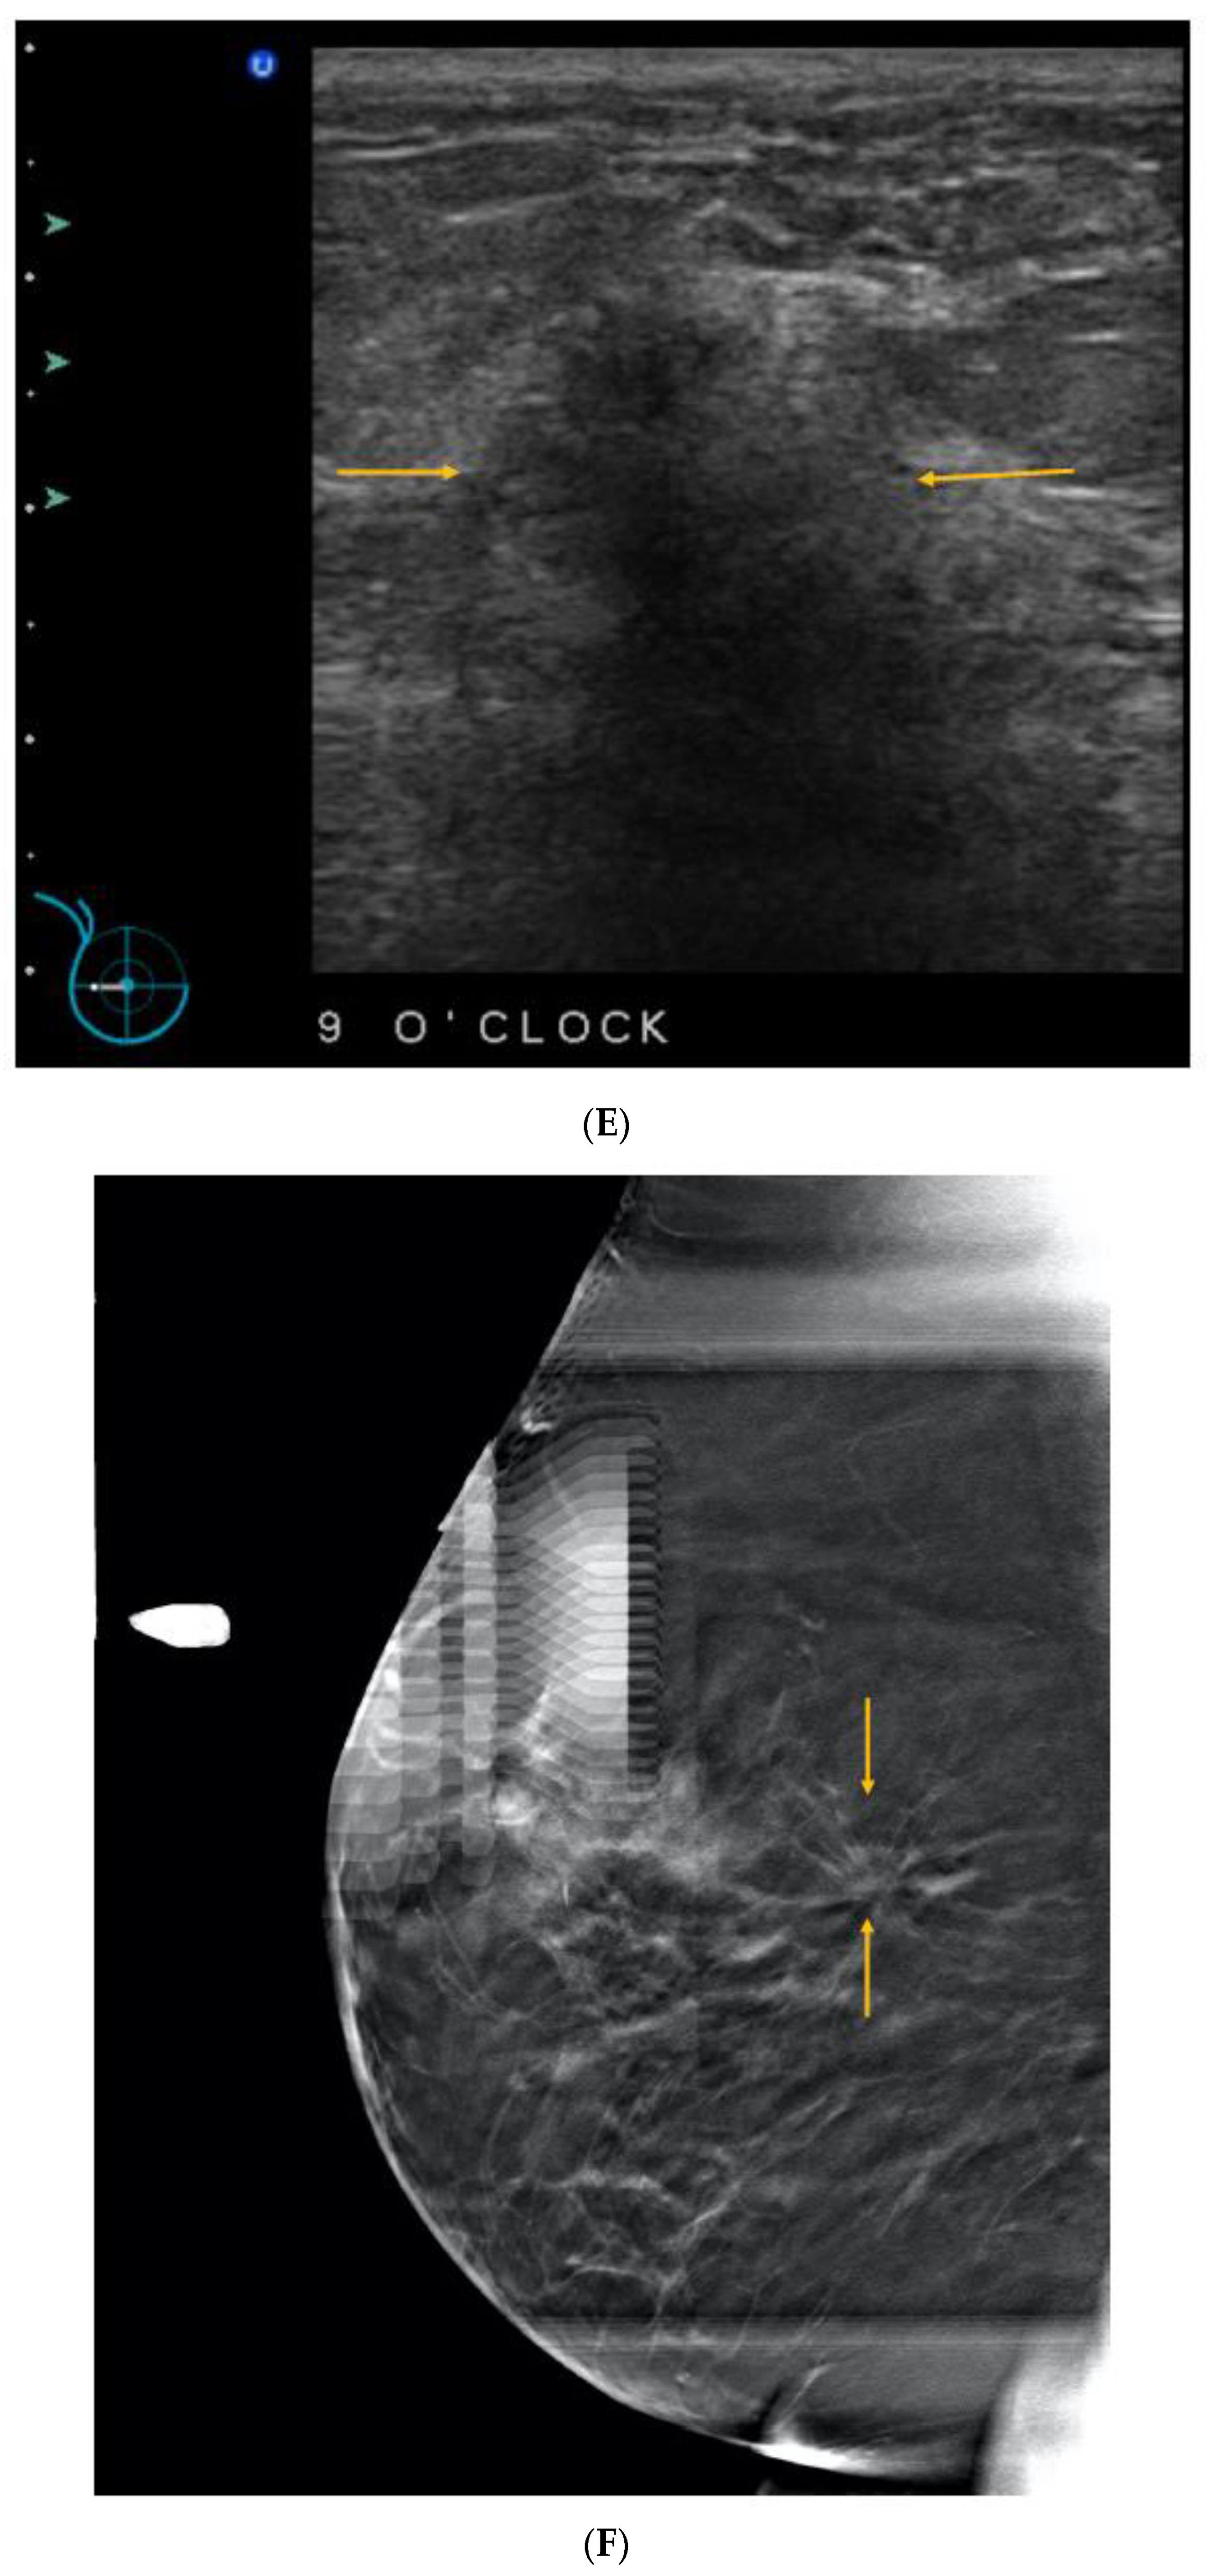 A 62-year-old woman with  non-dense  breast composition and small